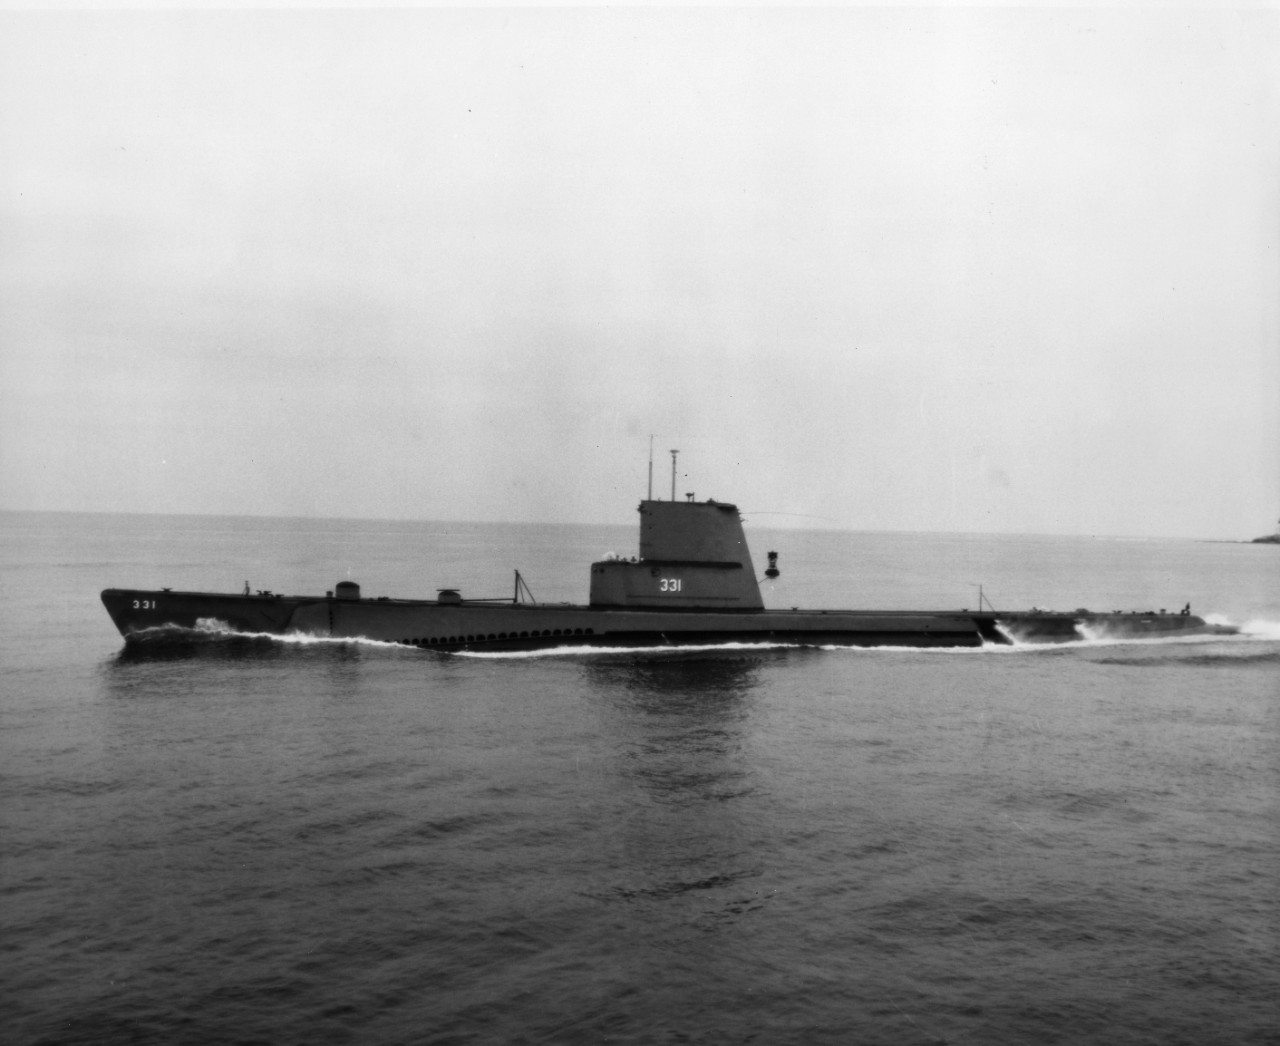 USS Bugara (SS-331) operating off Point Loma, San Diego